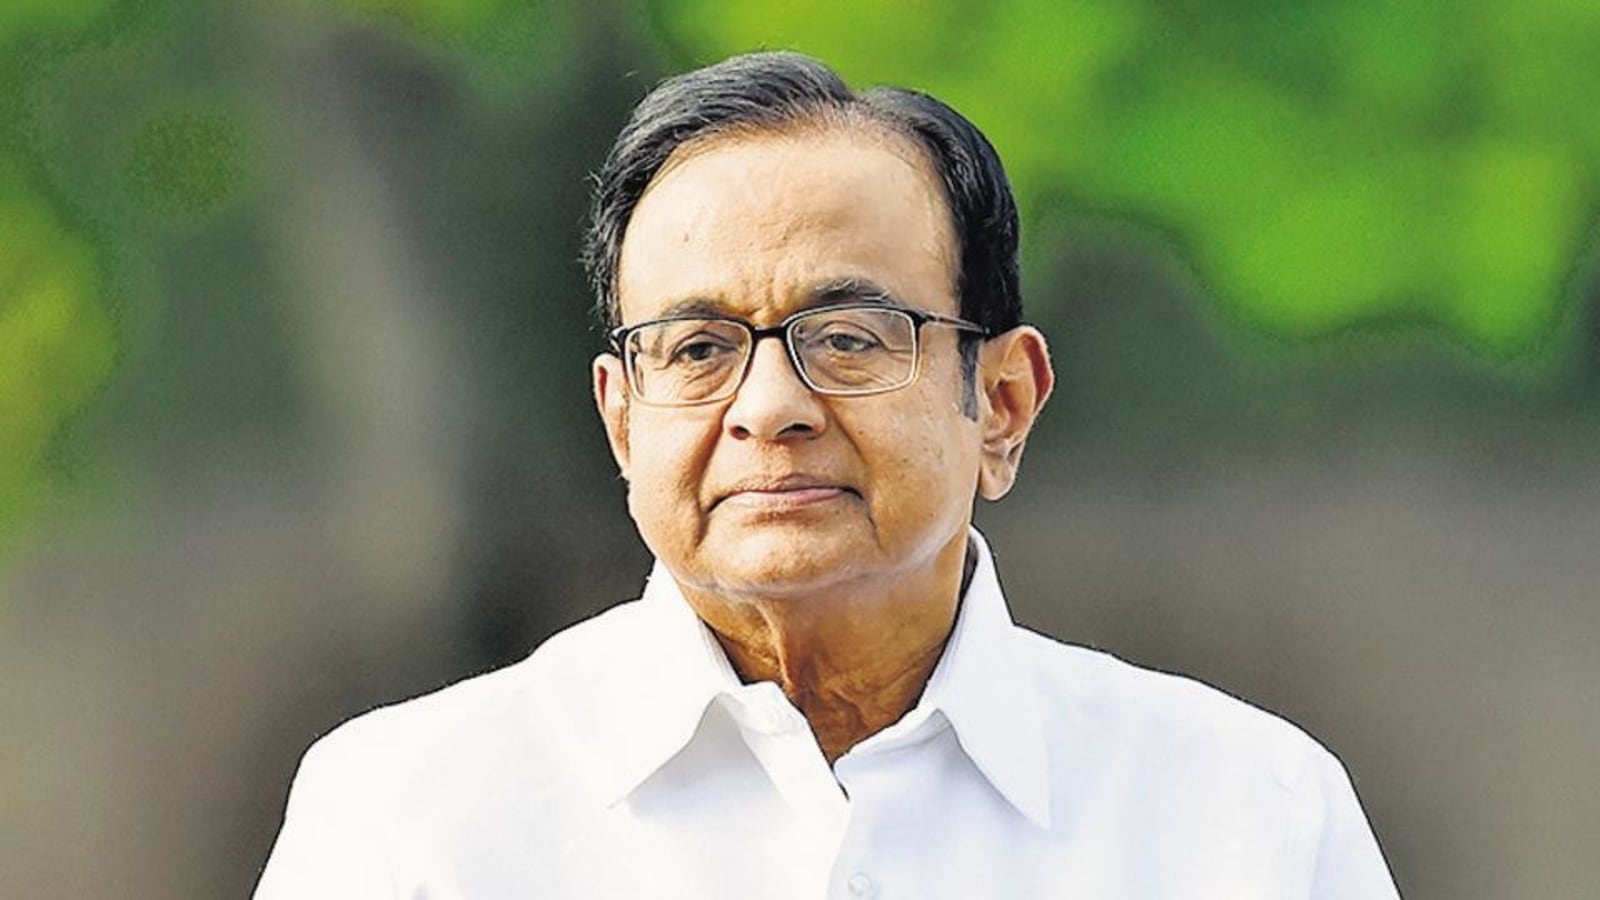 Former Union minister P Chidambaram likely to face court hearing today in  INX media case | Latest News India - Hindustan Times